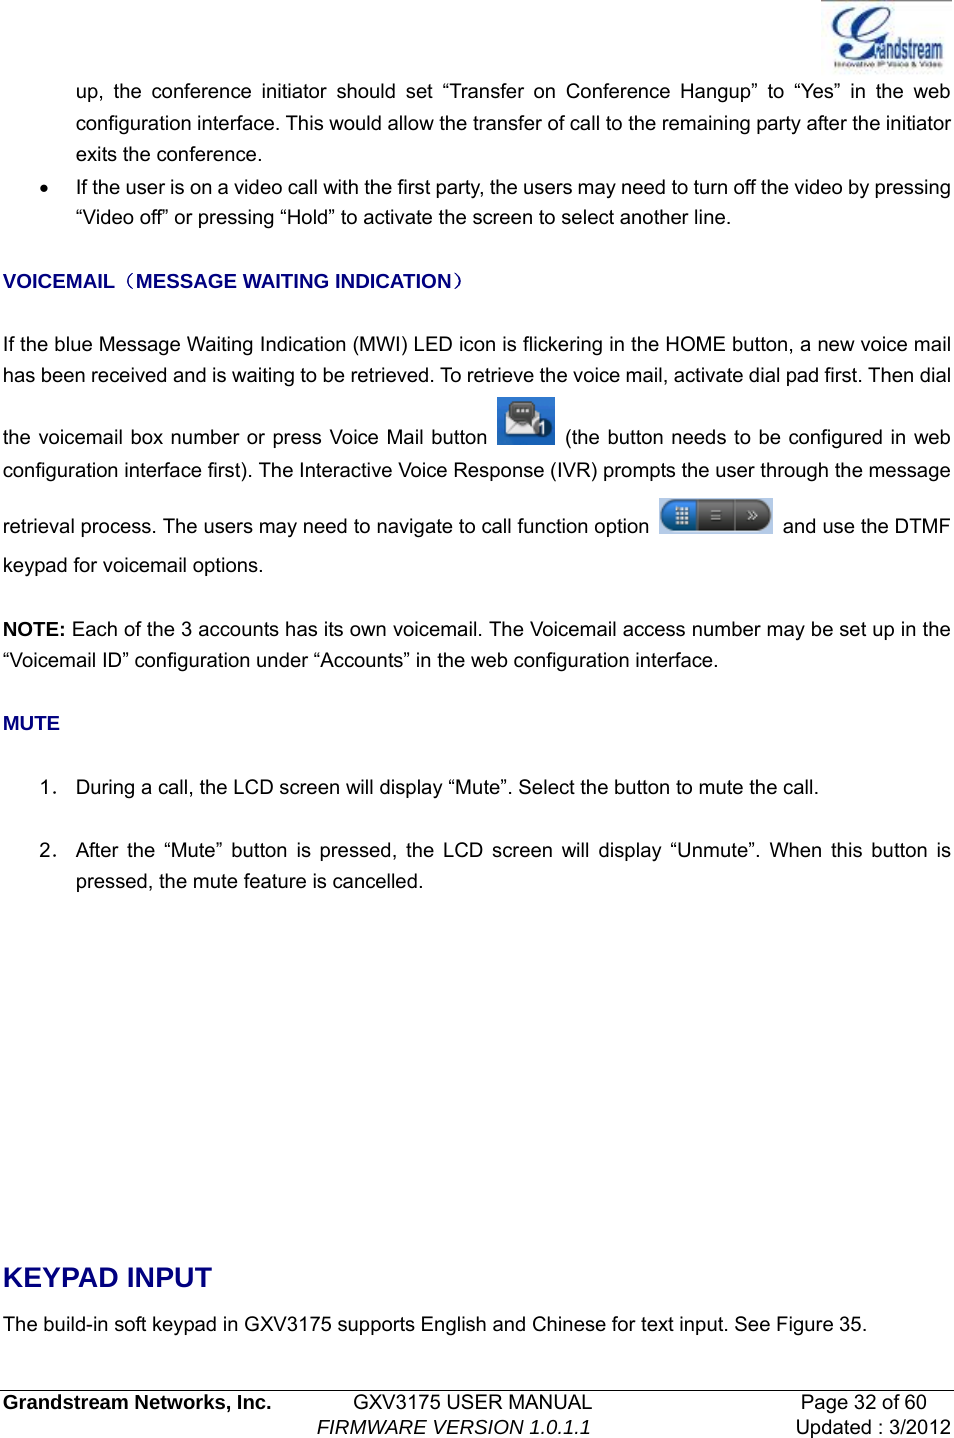   Grandstream Networks, Inc.        GXV3175 USER MANUAL                     Page 32 of 60                                FIRMWARE VERSION 1.0.1.1 Updated : 3/2012  up, the conference initiator should set “Transfer on Conference Hangup” to “Yes” in the web configuration interface. This would allow the transfer of call to the remaining party after the initiator exits the conference.   •  If the user is on a video call with the first party, the users may need to turn off the video by pressing “Video off” or pressing “Hold” to activate the screen to select another line.  VOICEMAIL（MESSAGE WAITING INDICATION）  If the blue Message Waiting Indication (MWI) LED icon is flickering in the HOME button, a new voice mail has been received and is waiting to be retrieved. To retrieve the voice mail, activate dial pad first. Then dial the voicemail box number or press Voice Mail button    (the button needs to be configured in web configuration interface first). The Interactive Voice Response (IVR) prompts the user through the message retrieval process. The users may need to navigate to call function option    and use the DTMF keypad for voicemail options.  NOTE: Each of the 3 accounts has its own voicemail. The Voicemail access number may be set up in the “Voicemail ID” configuration under “Accounts” in the web configuration interface.  MUTE  1． During a call, the LCD screen will display “Mute”. Select the button to mute the call.  2． After the “Mute” button is pressed, the LCD screen will display “Unmute”. When this button is pressed, the mute feature is cancelled.       KEYPAD INPUT The build-in soft keypad in GXV3175 supports English and Chinese for text input. See Figure 35. 